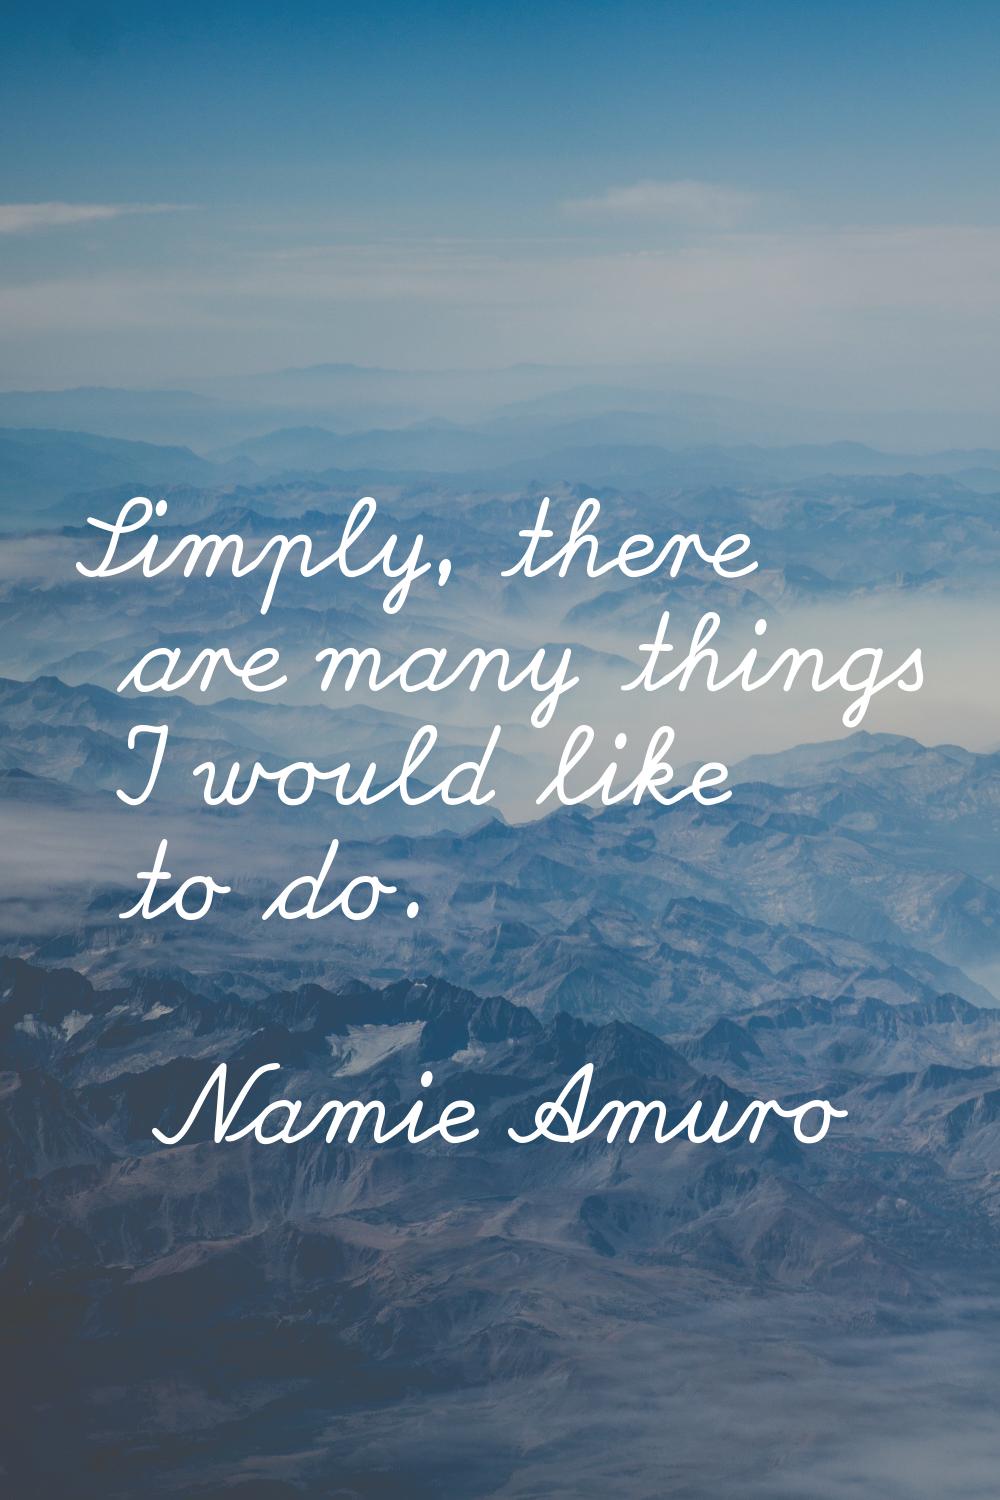 Simply, there are many things I would like to do.